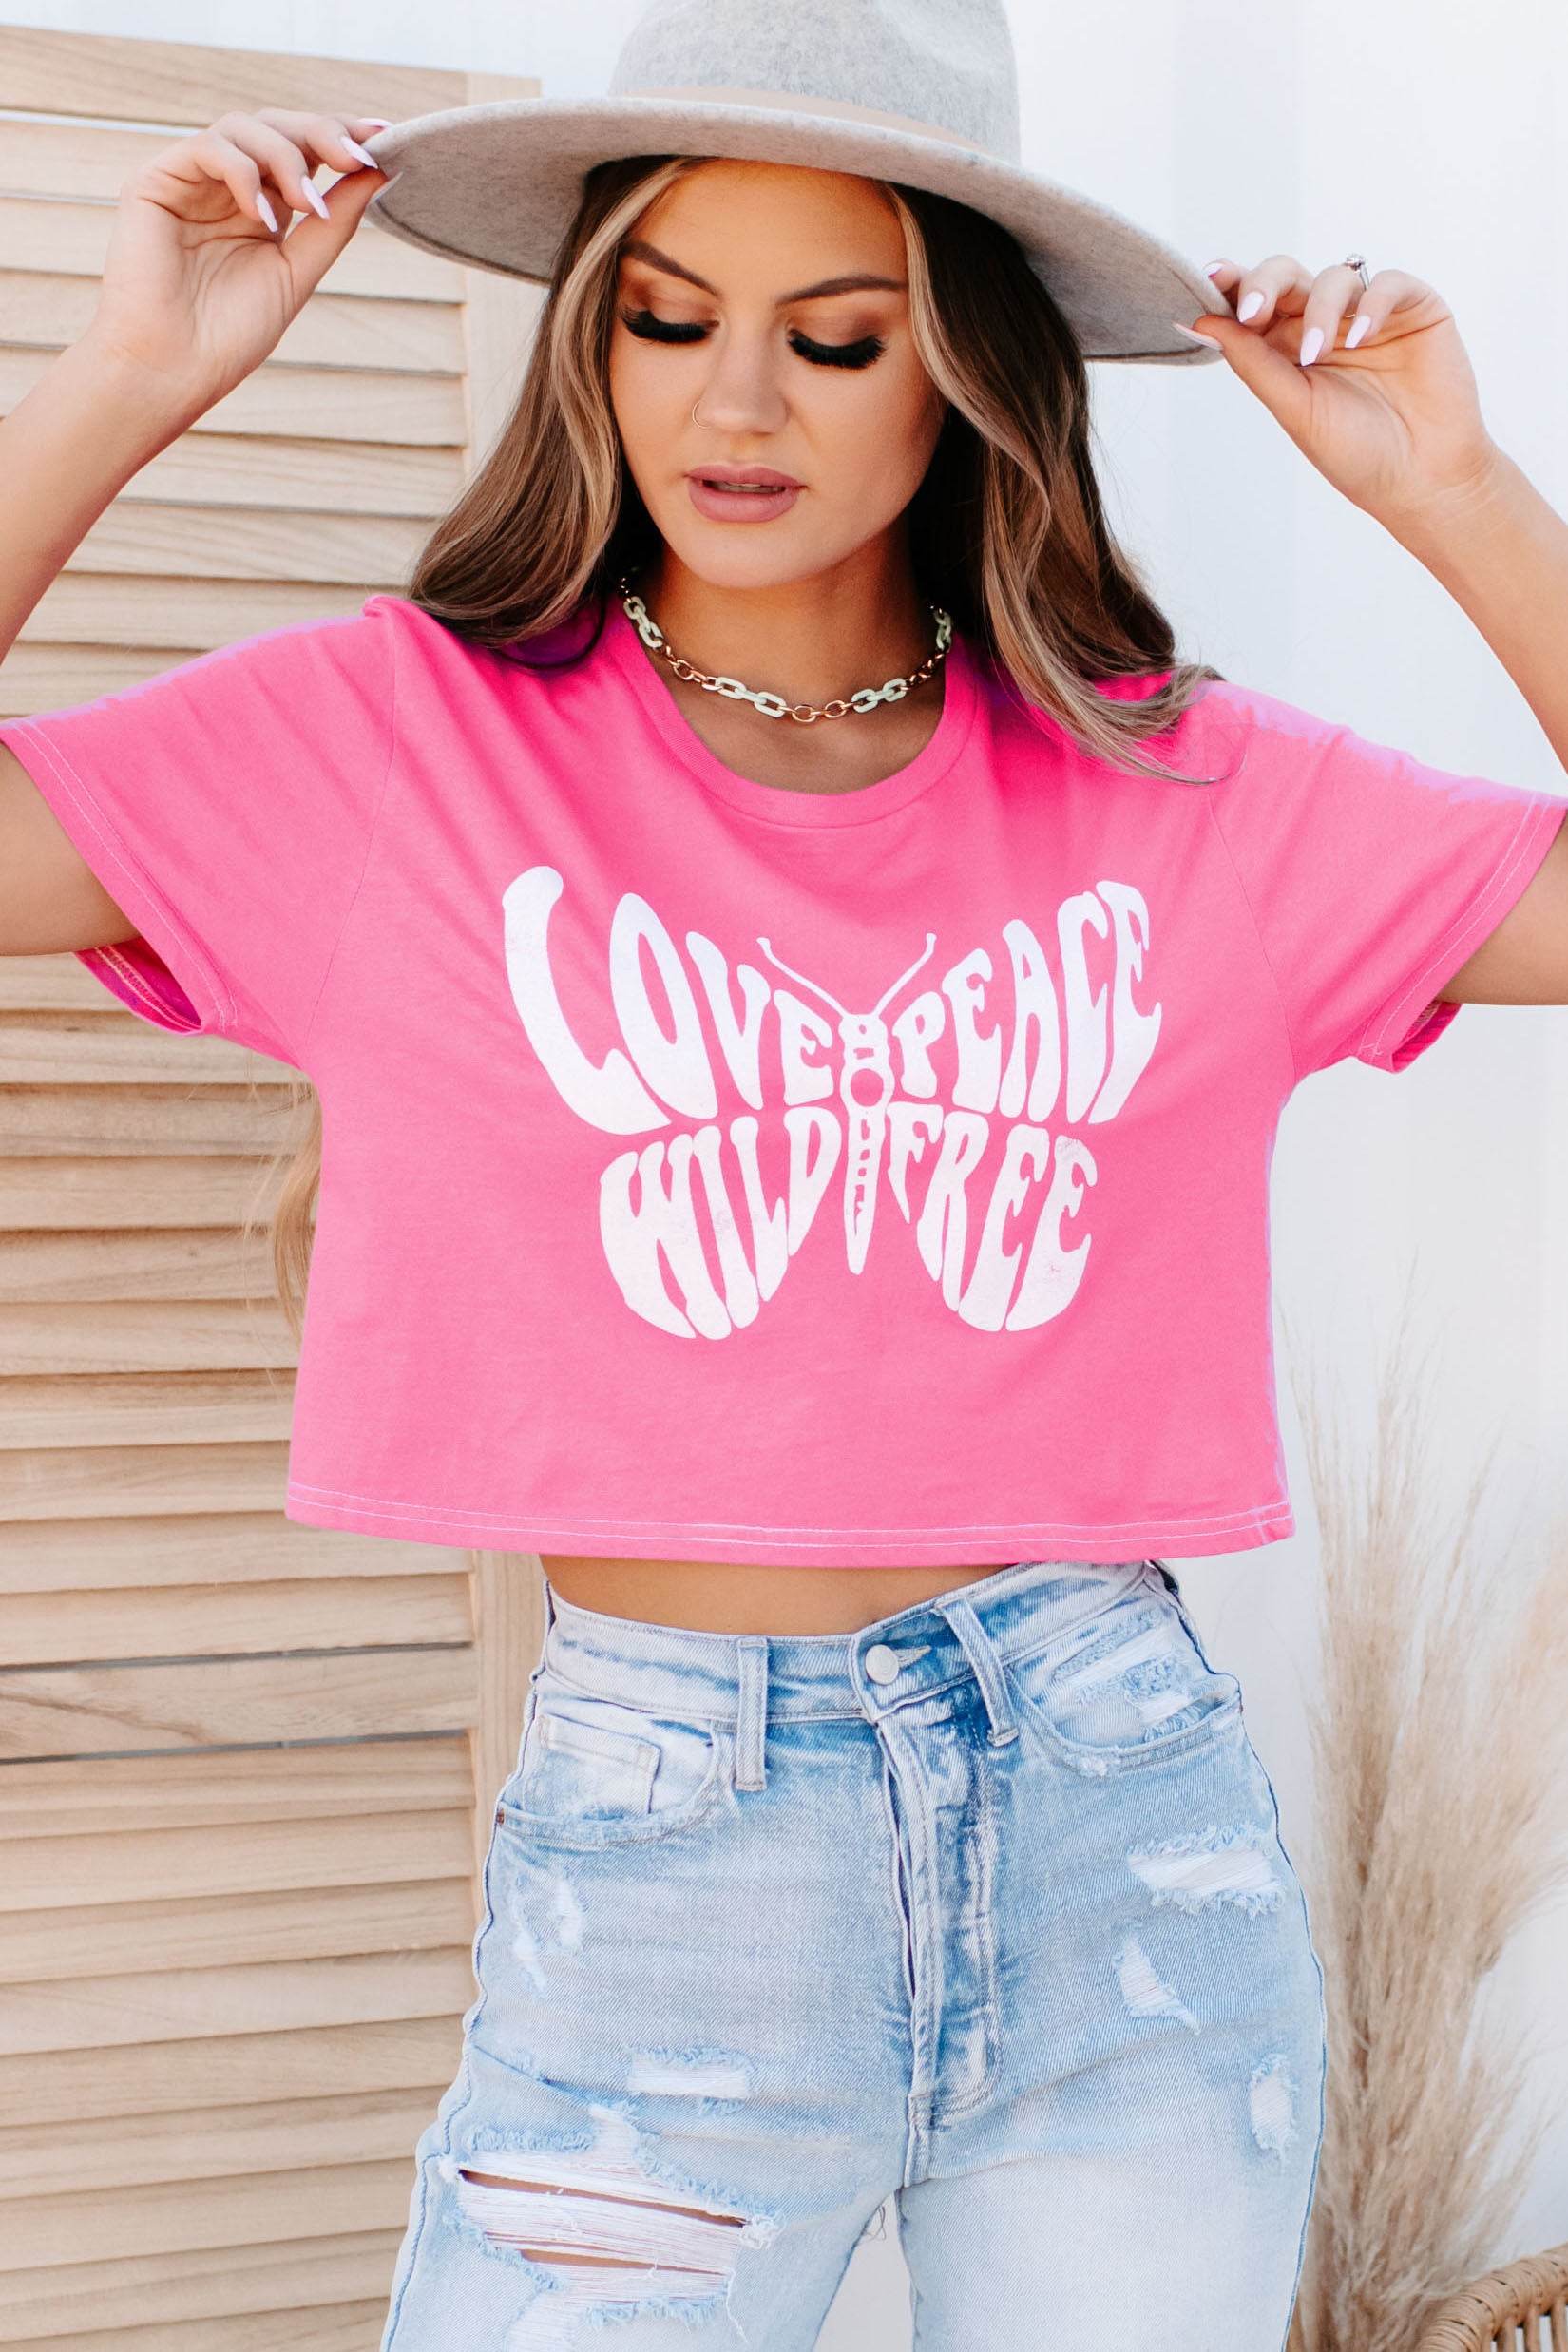 Love, Peace, Wild, & Free Cropped Graphic Tee (Pink) - NanaMacs